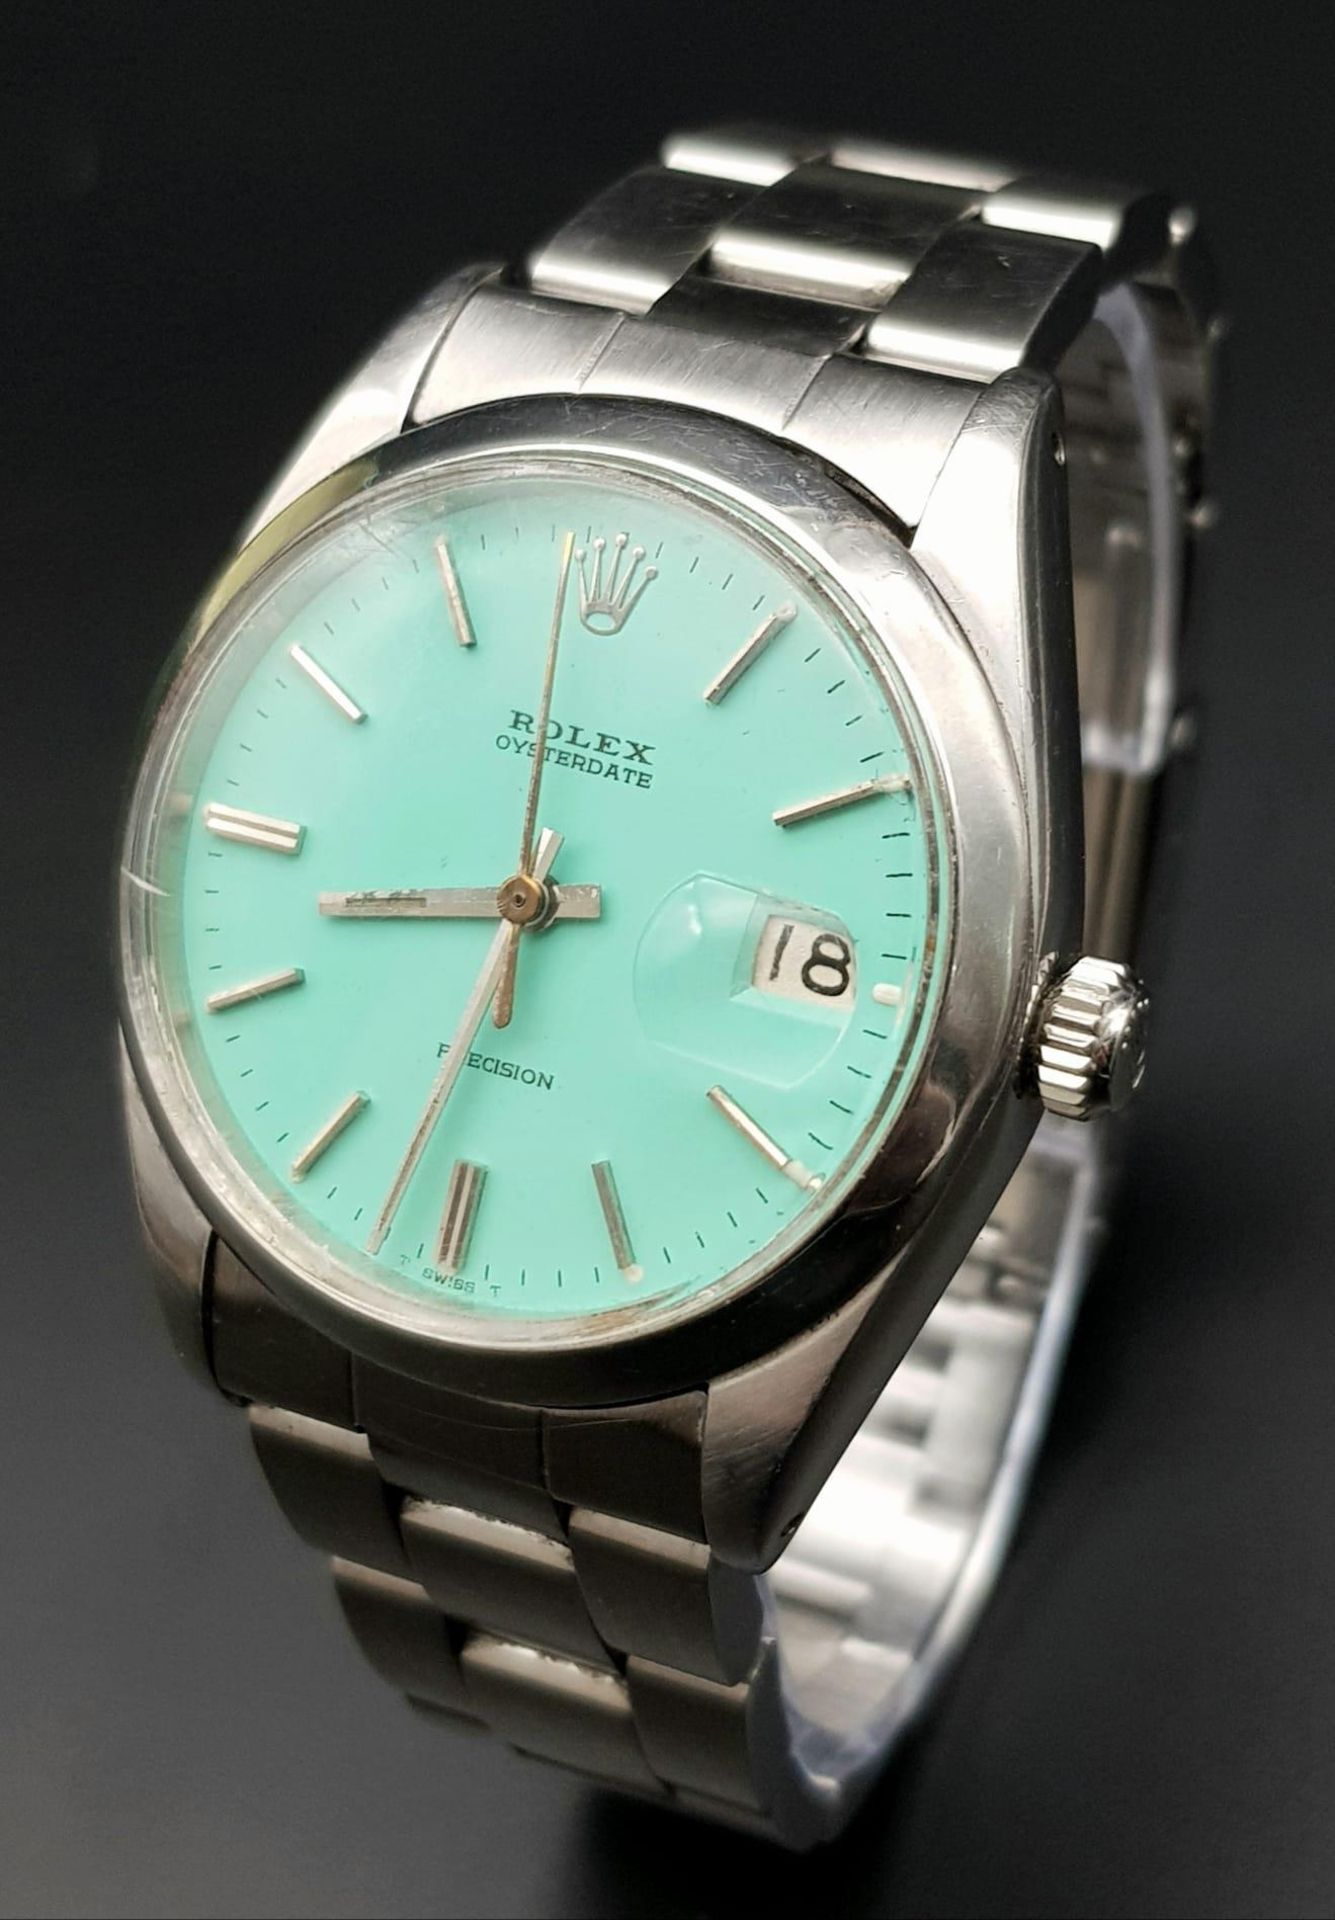 A Vintage Rolex Oysterdate Precision Mid-Size Watch. Stainless steel bracelet and case - 35mm.